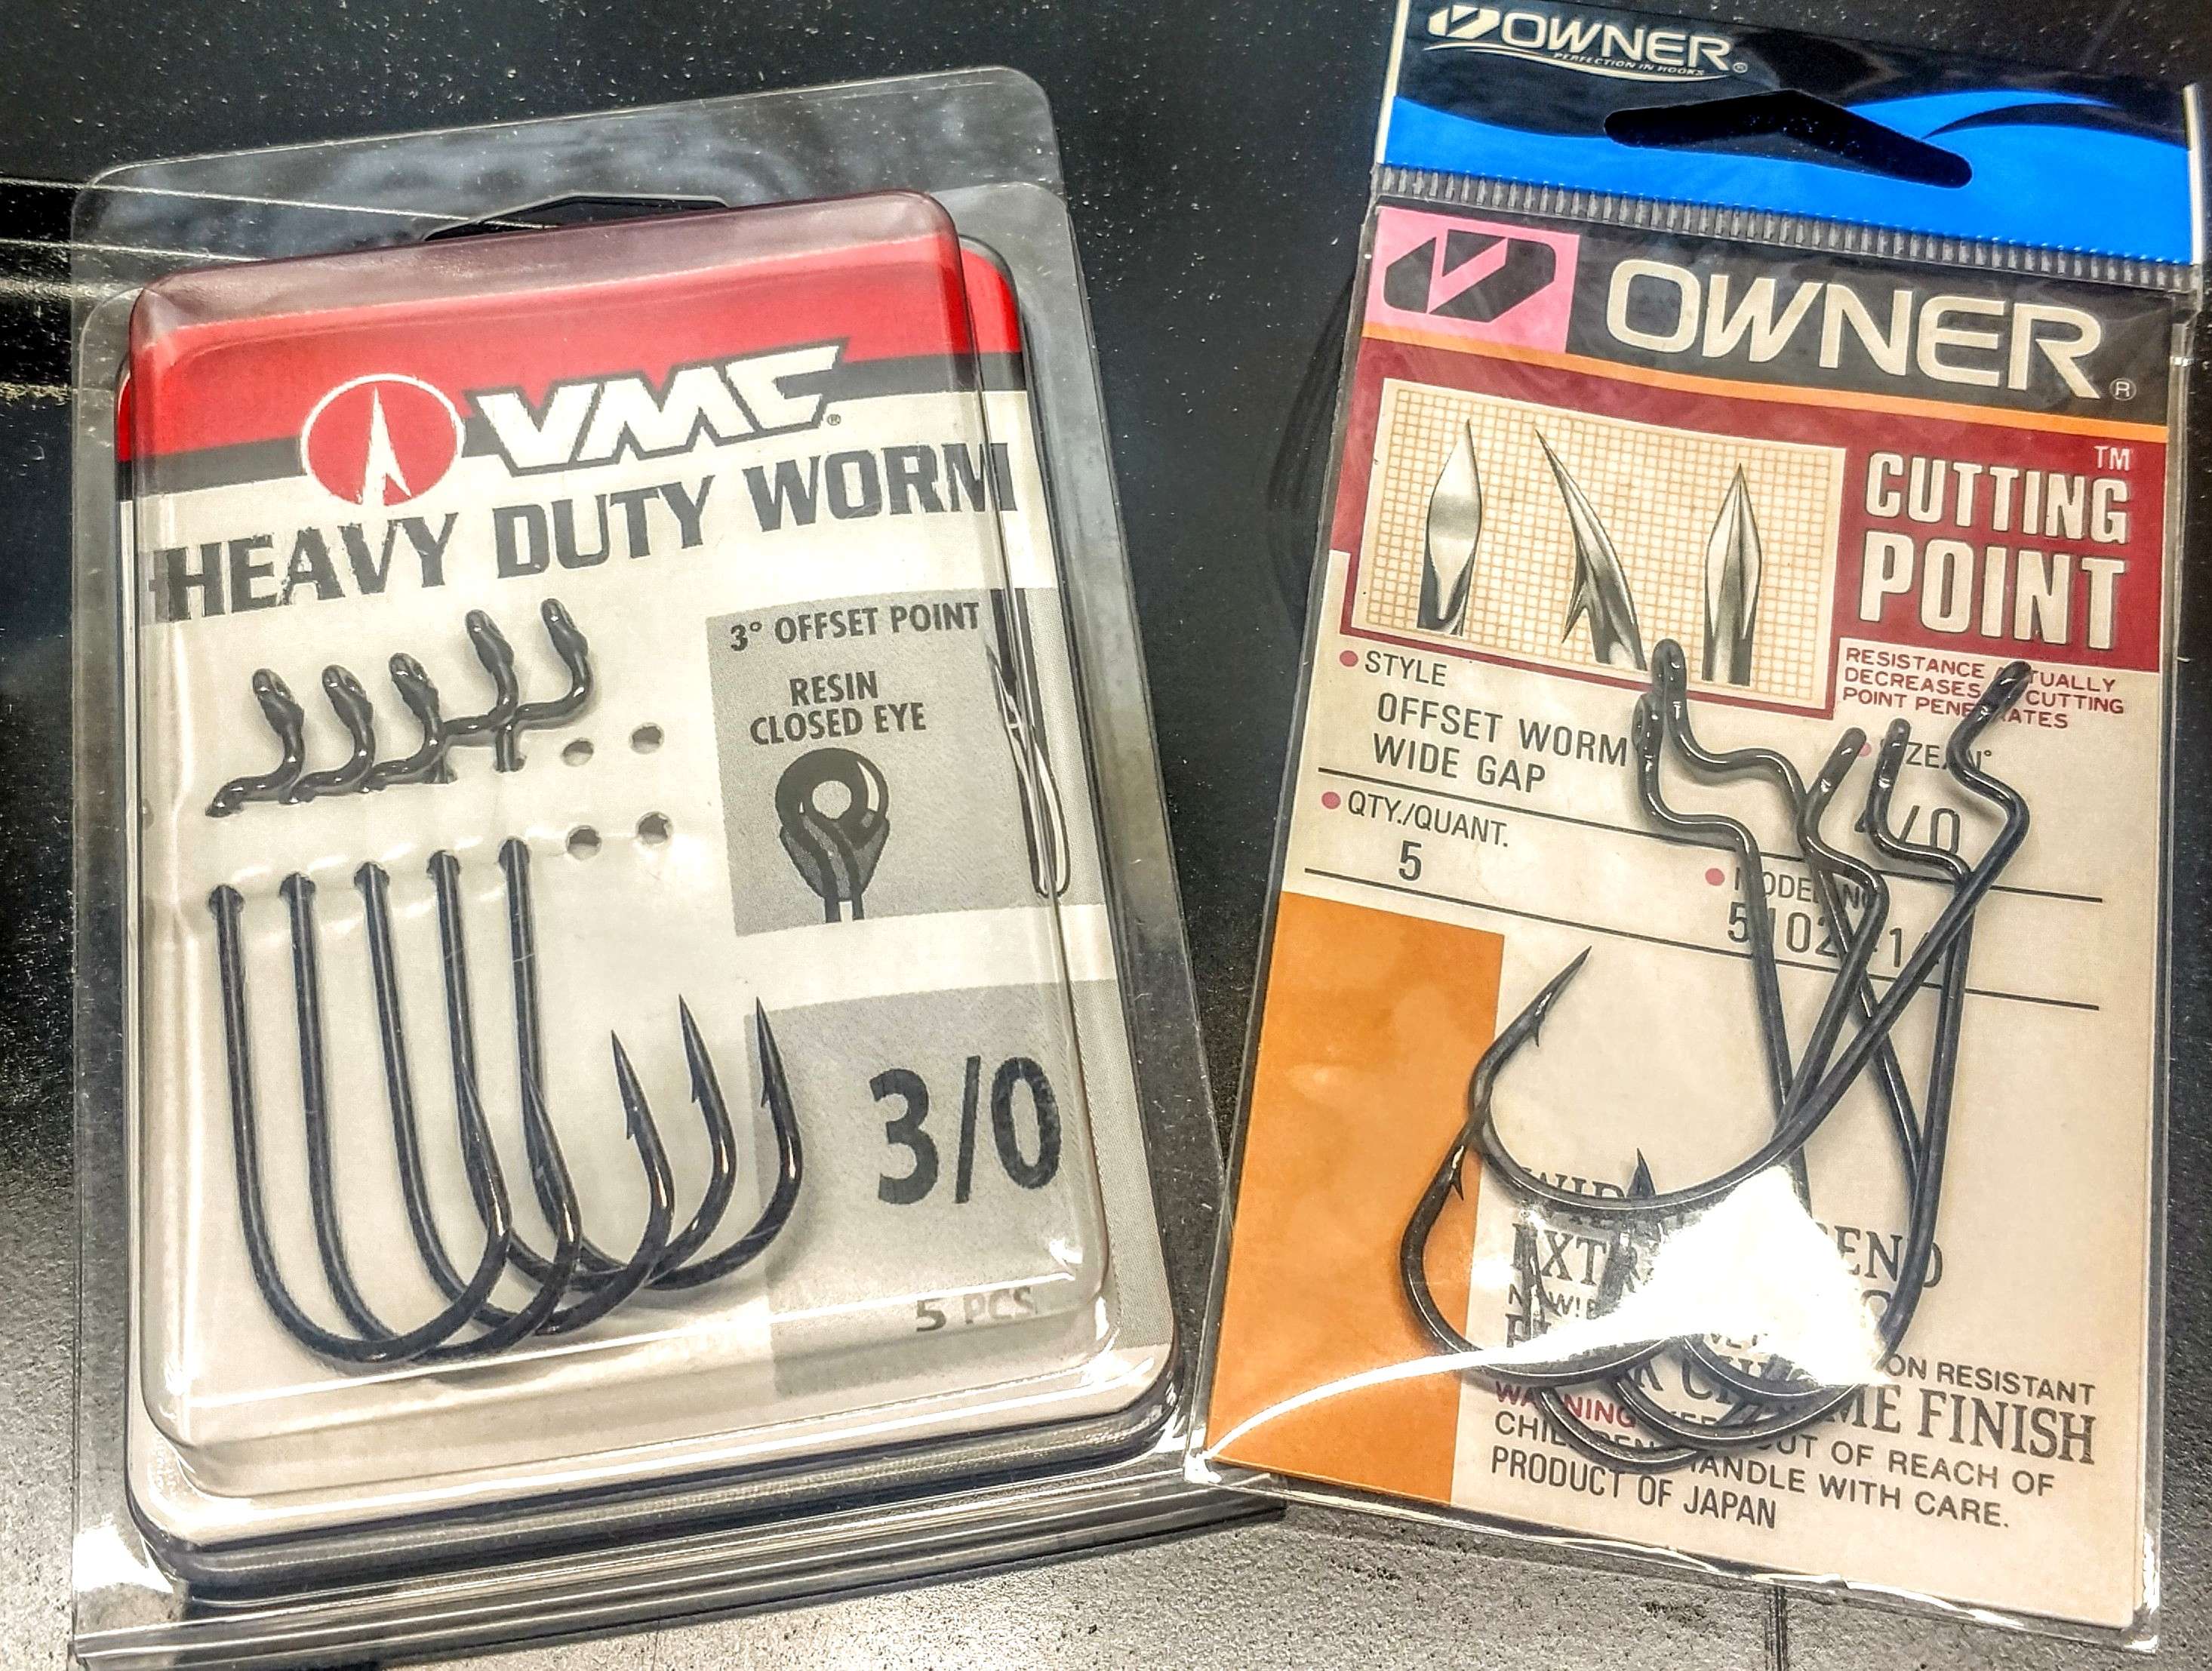 Offset Worm Hooks : O'Shaughnessy Bend vs. Round Bend ? - Fishing Tackle -  Bass Fishing Forums